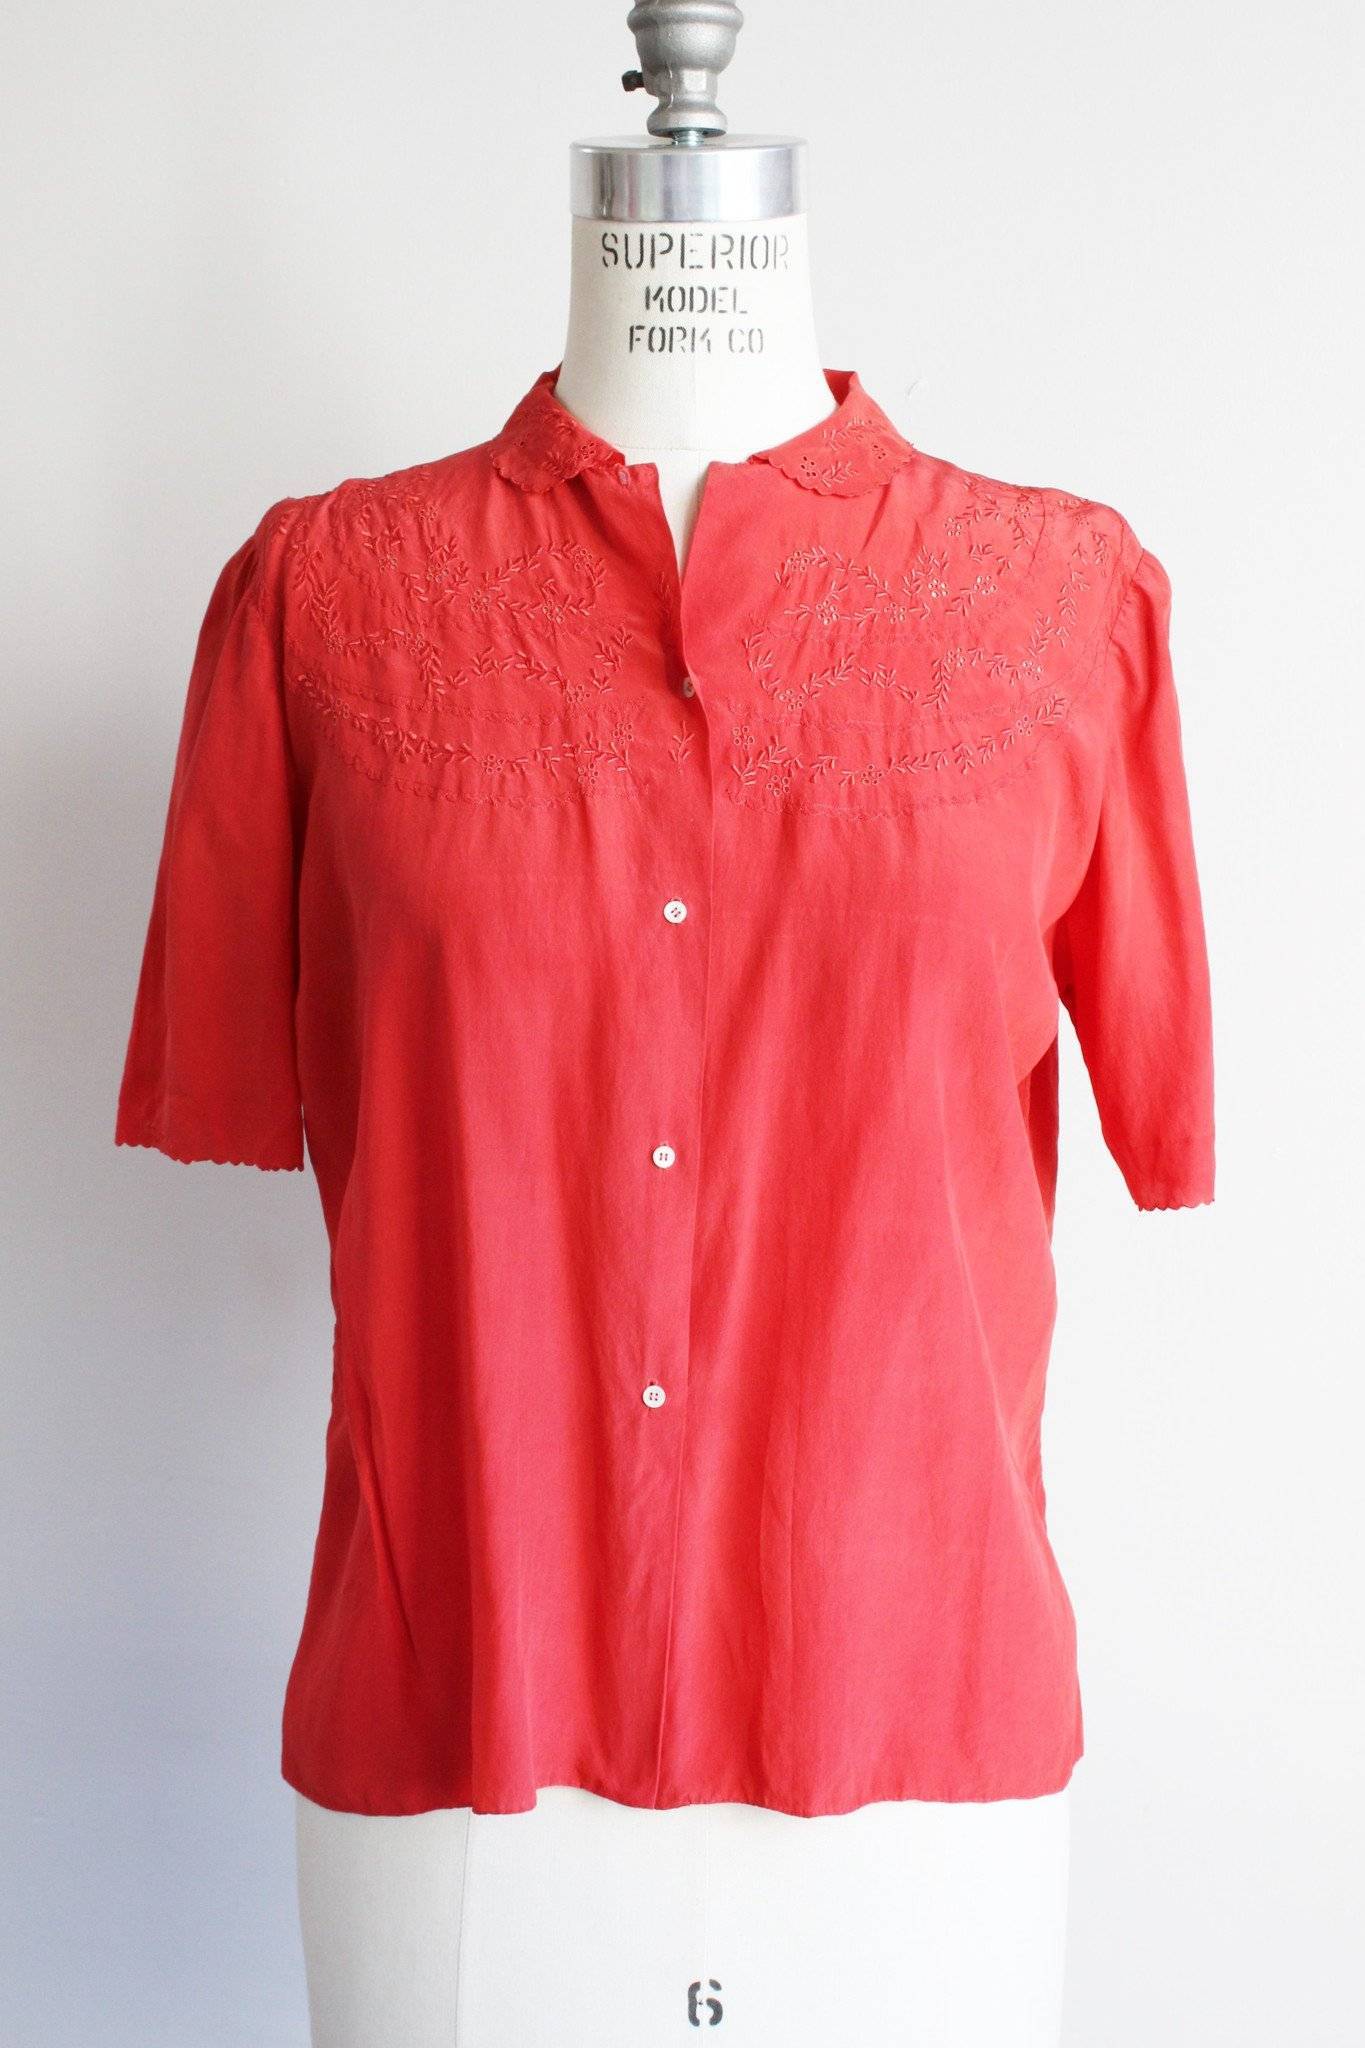 Vintage 1950s Red Silk Embroidered Blouse-Toadstool Farm Vintage-1950s Silk Blouse,50s Top,Casual Wear,Embroidered Blouse,Peter Pan Collar,Red Silk,Vintage,Vintage Clothing